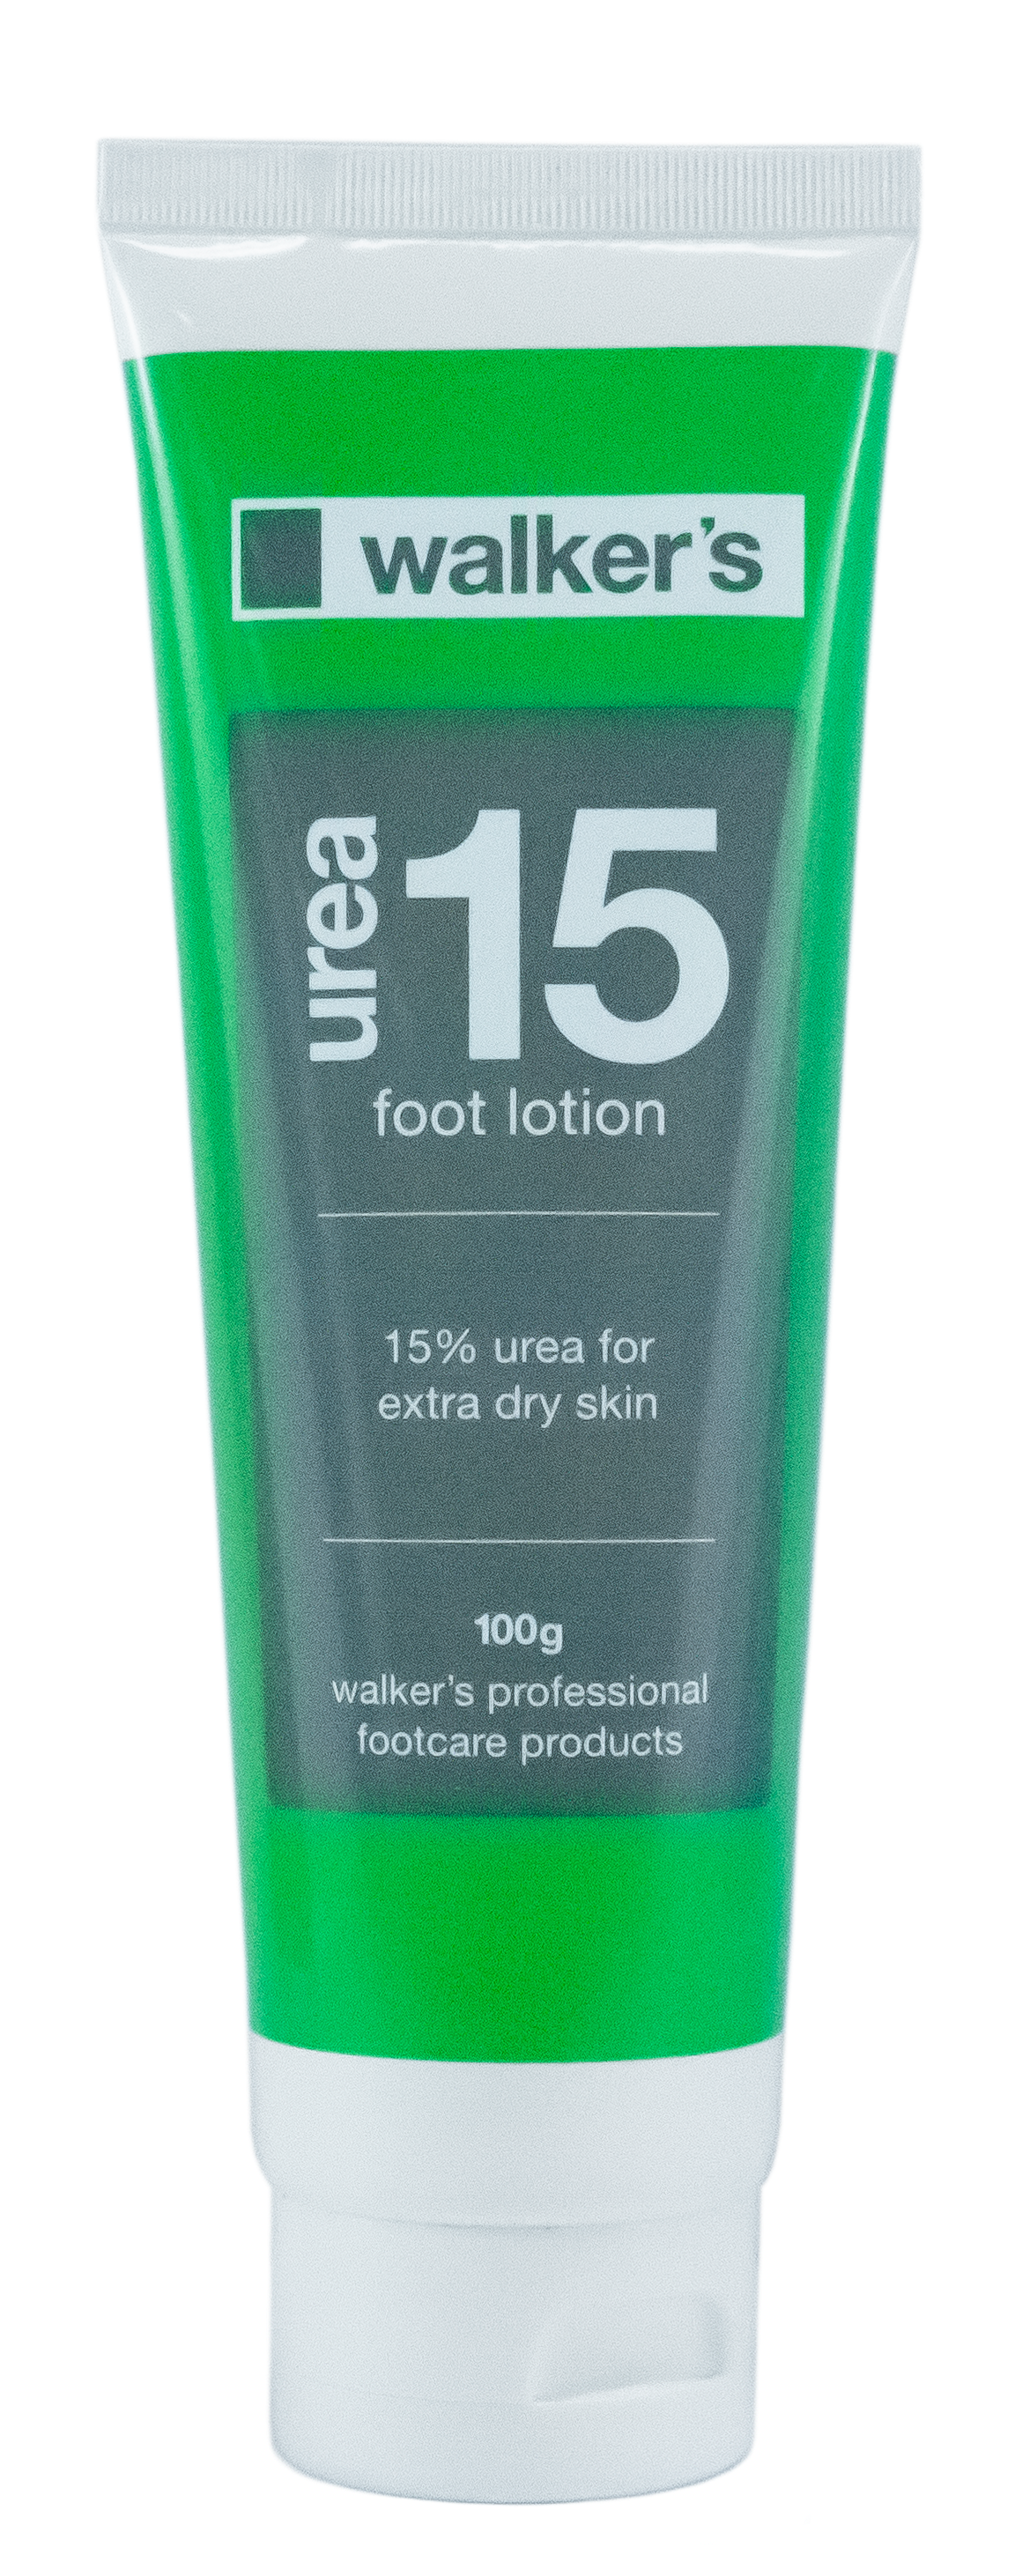 Walker's Urea 15 Foot Lotion for extra dry skin 100g